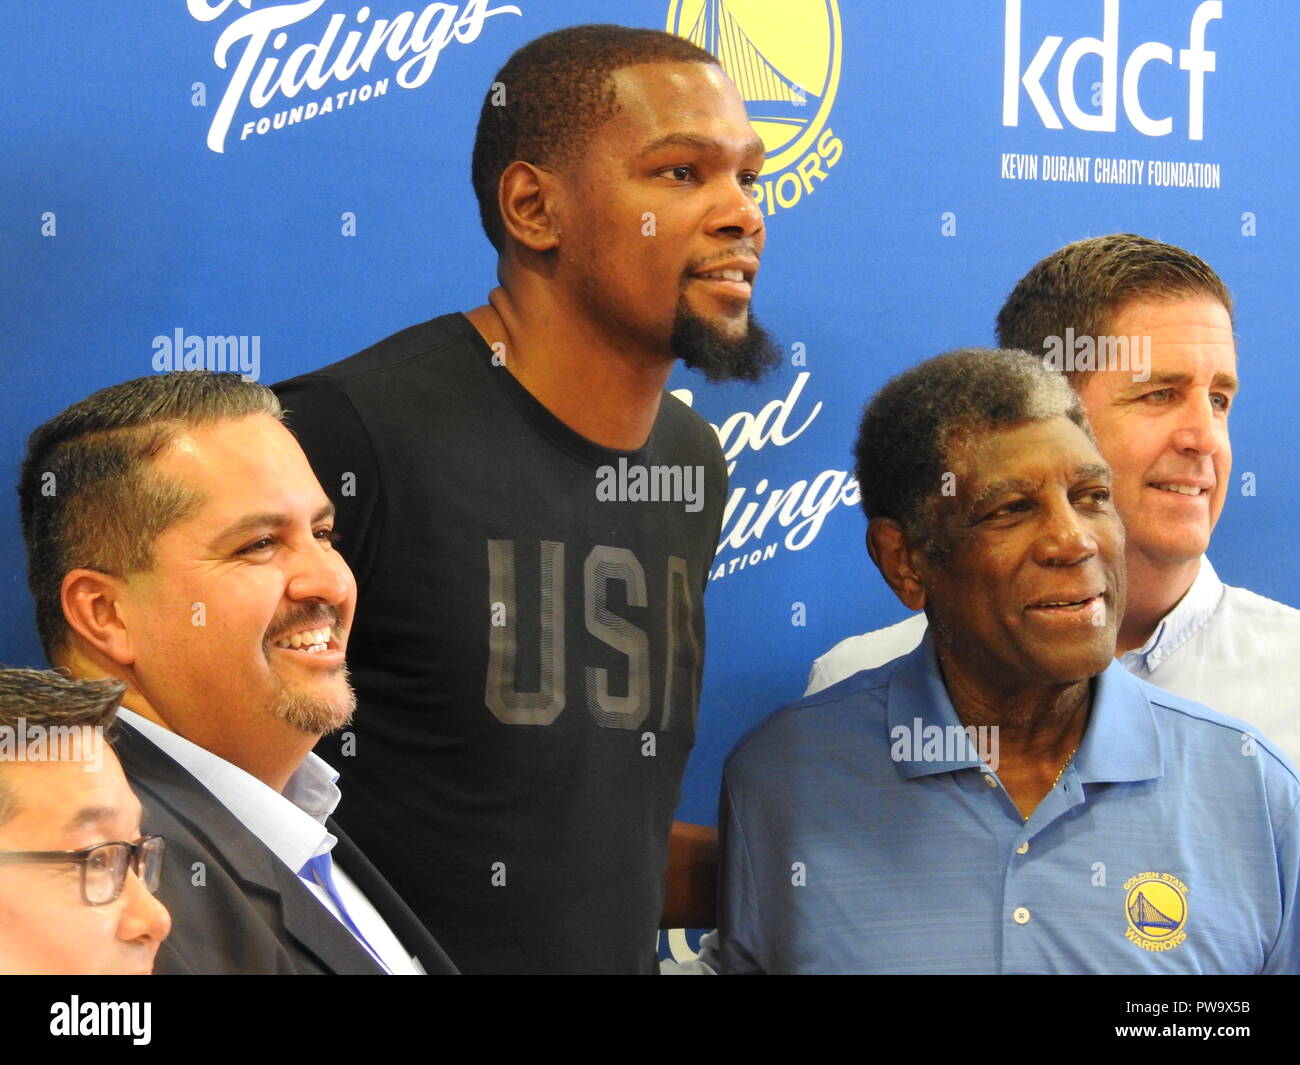 Oakland city councilmember Abel Guille, Golden State Warriors Finals MVP Kevin Durant, Warriors coach Al Attles and Good Tidings Foundation founder Larry Harper appear at an event to unveil four new basketball courts donated to the Lincoln Square Recreation Center in Oakland's Chinatown by the Kevin Durant Charity Foundation on May 17, 2017. Stock Photo